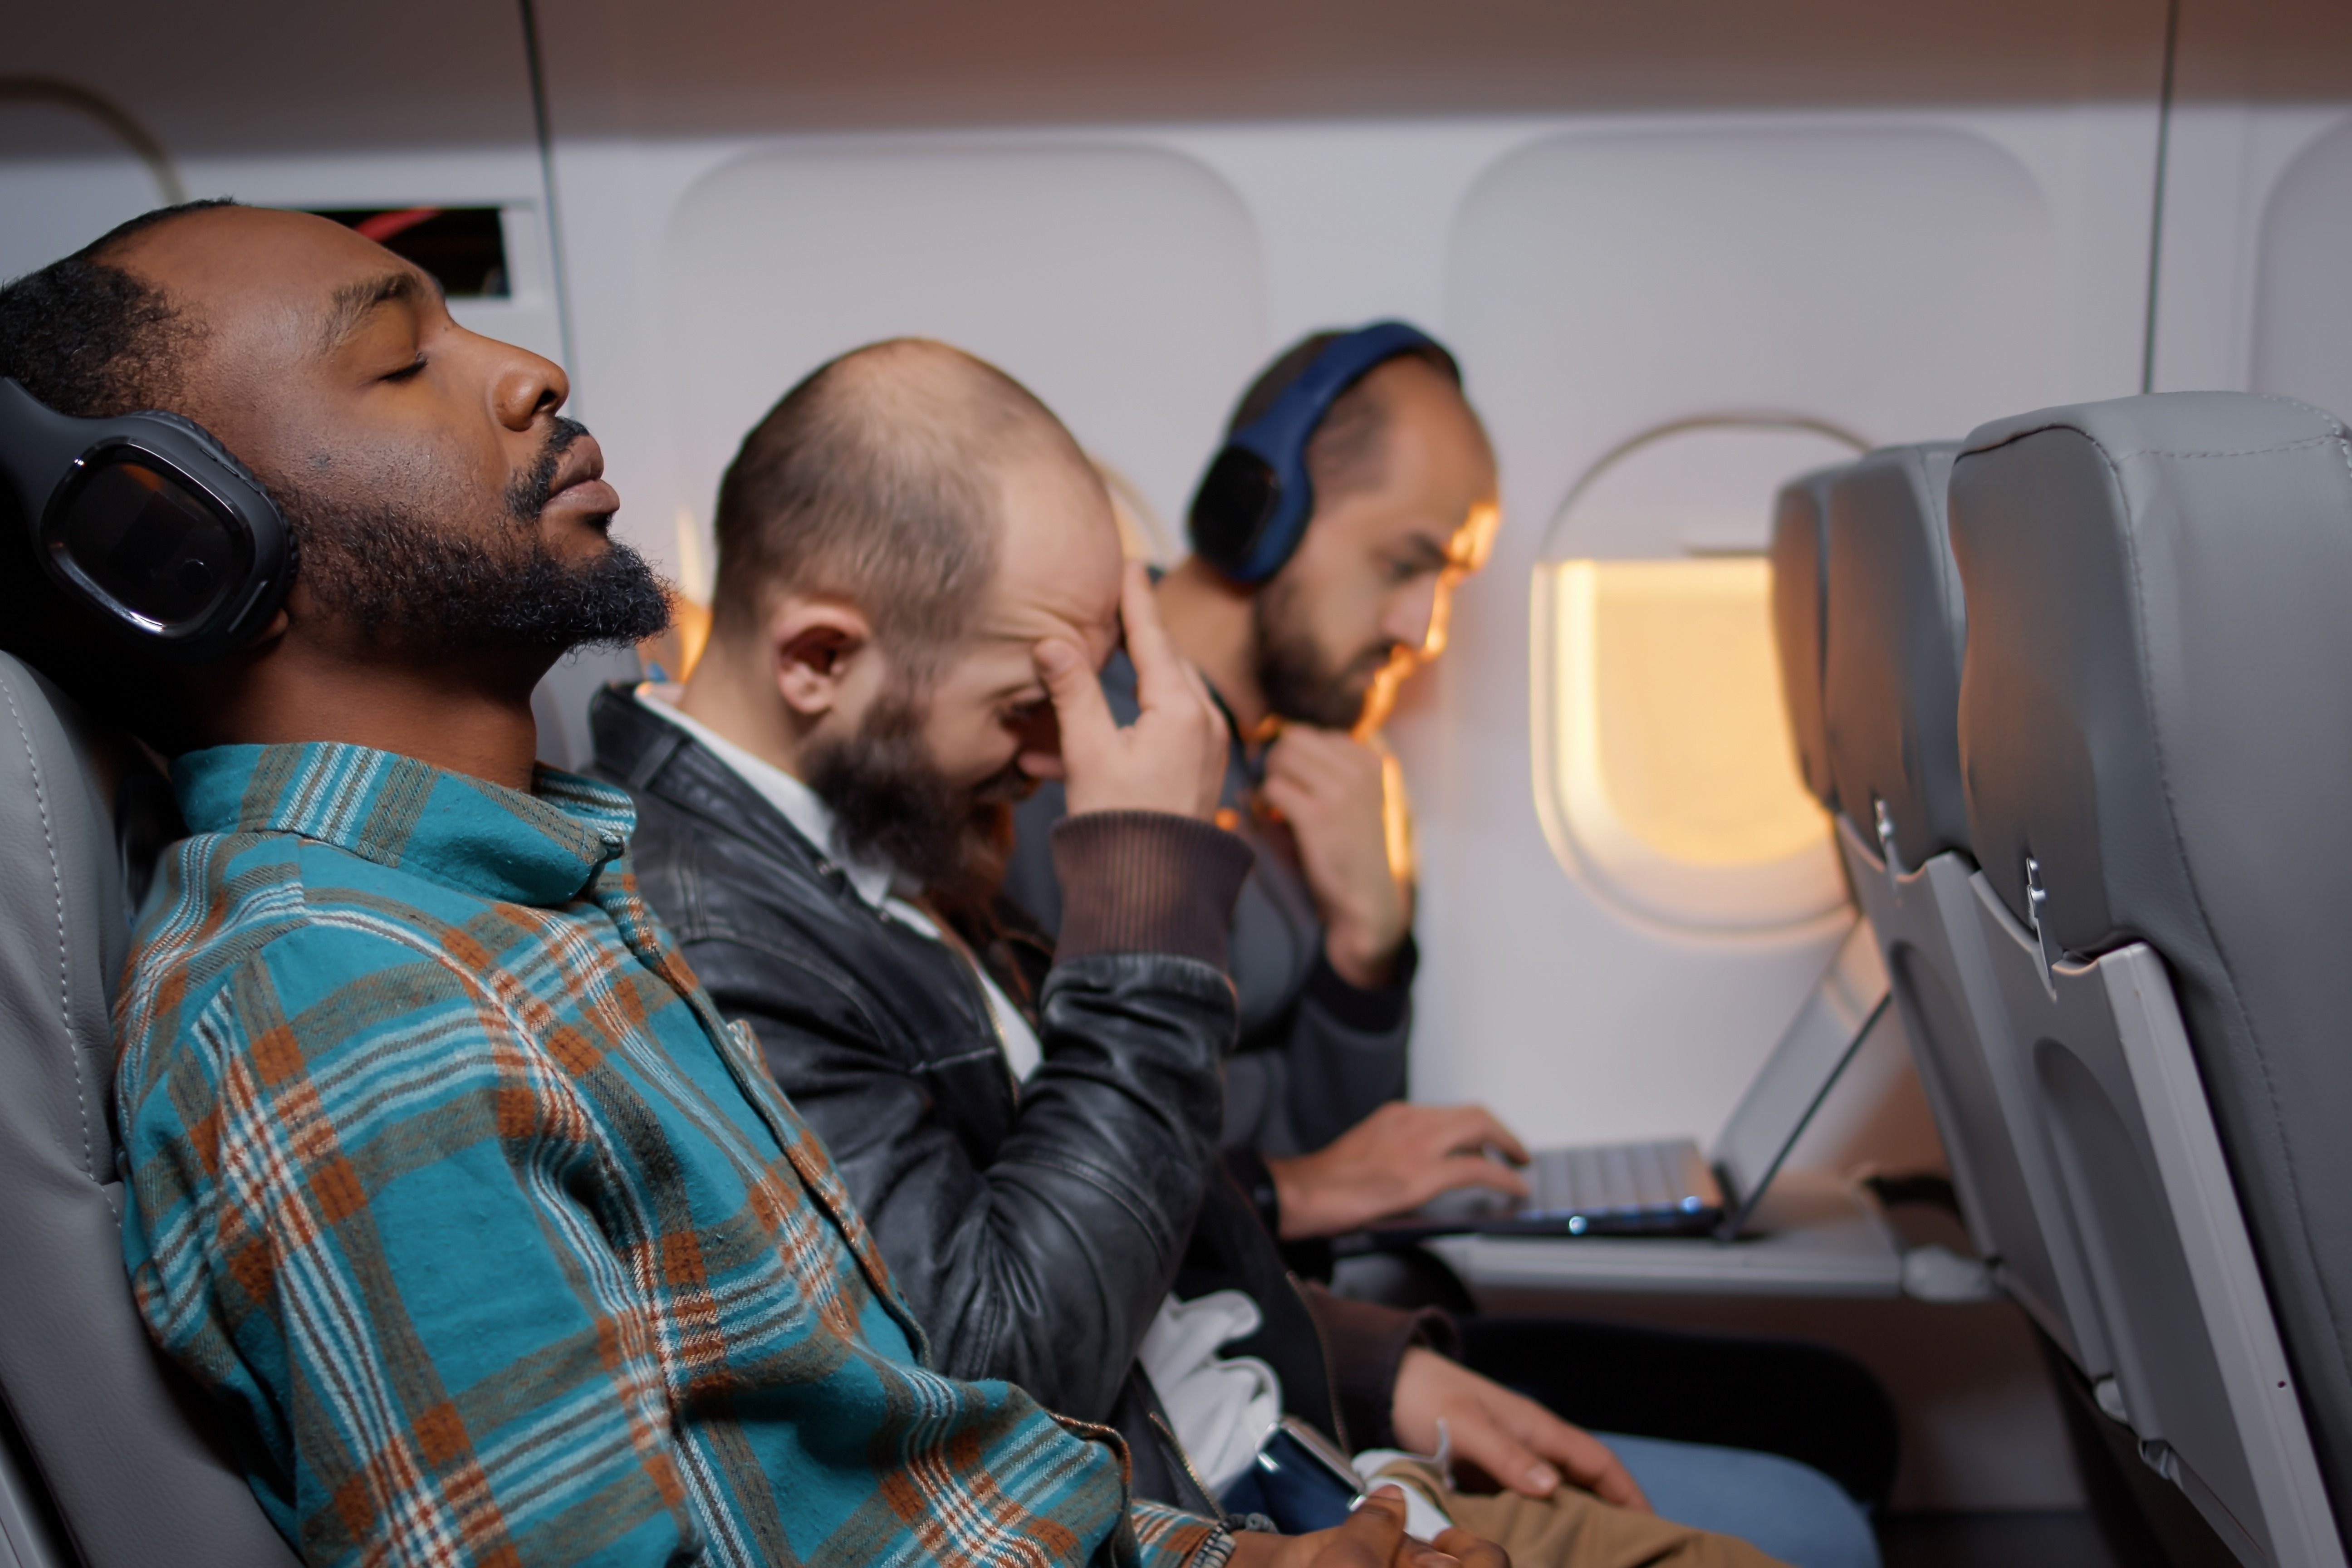 Three Passengers sitting in an economy class row on an aircraft.